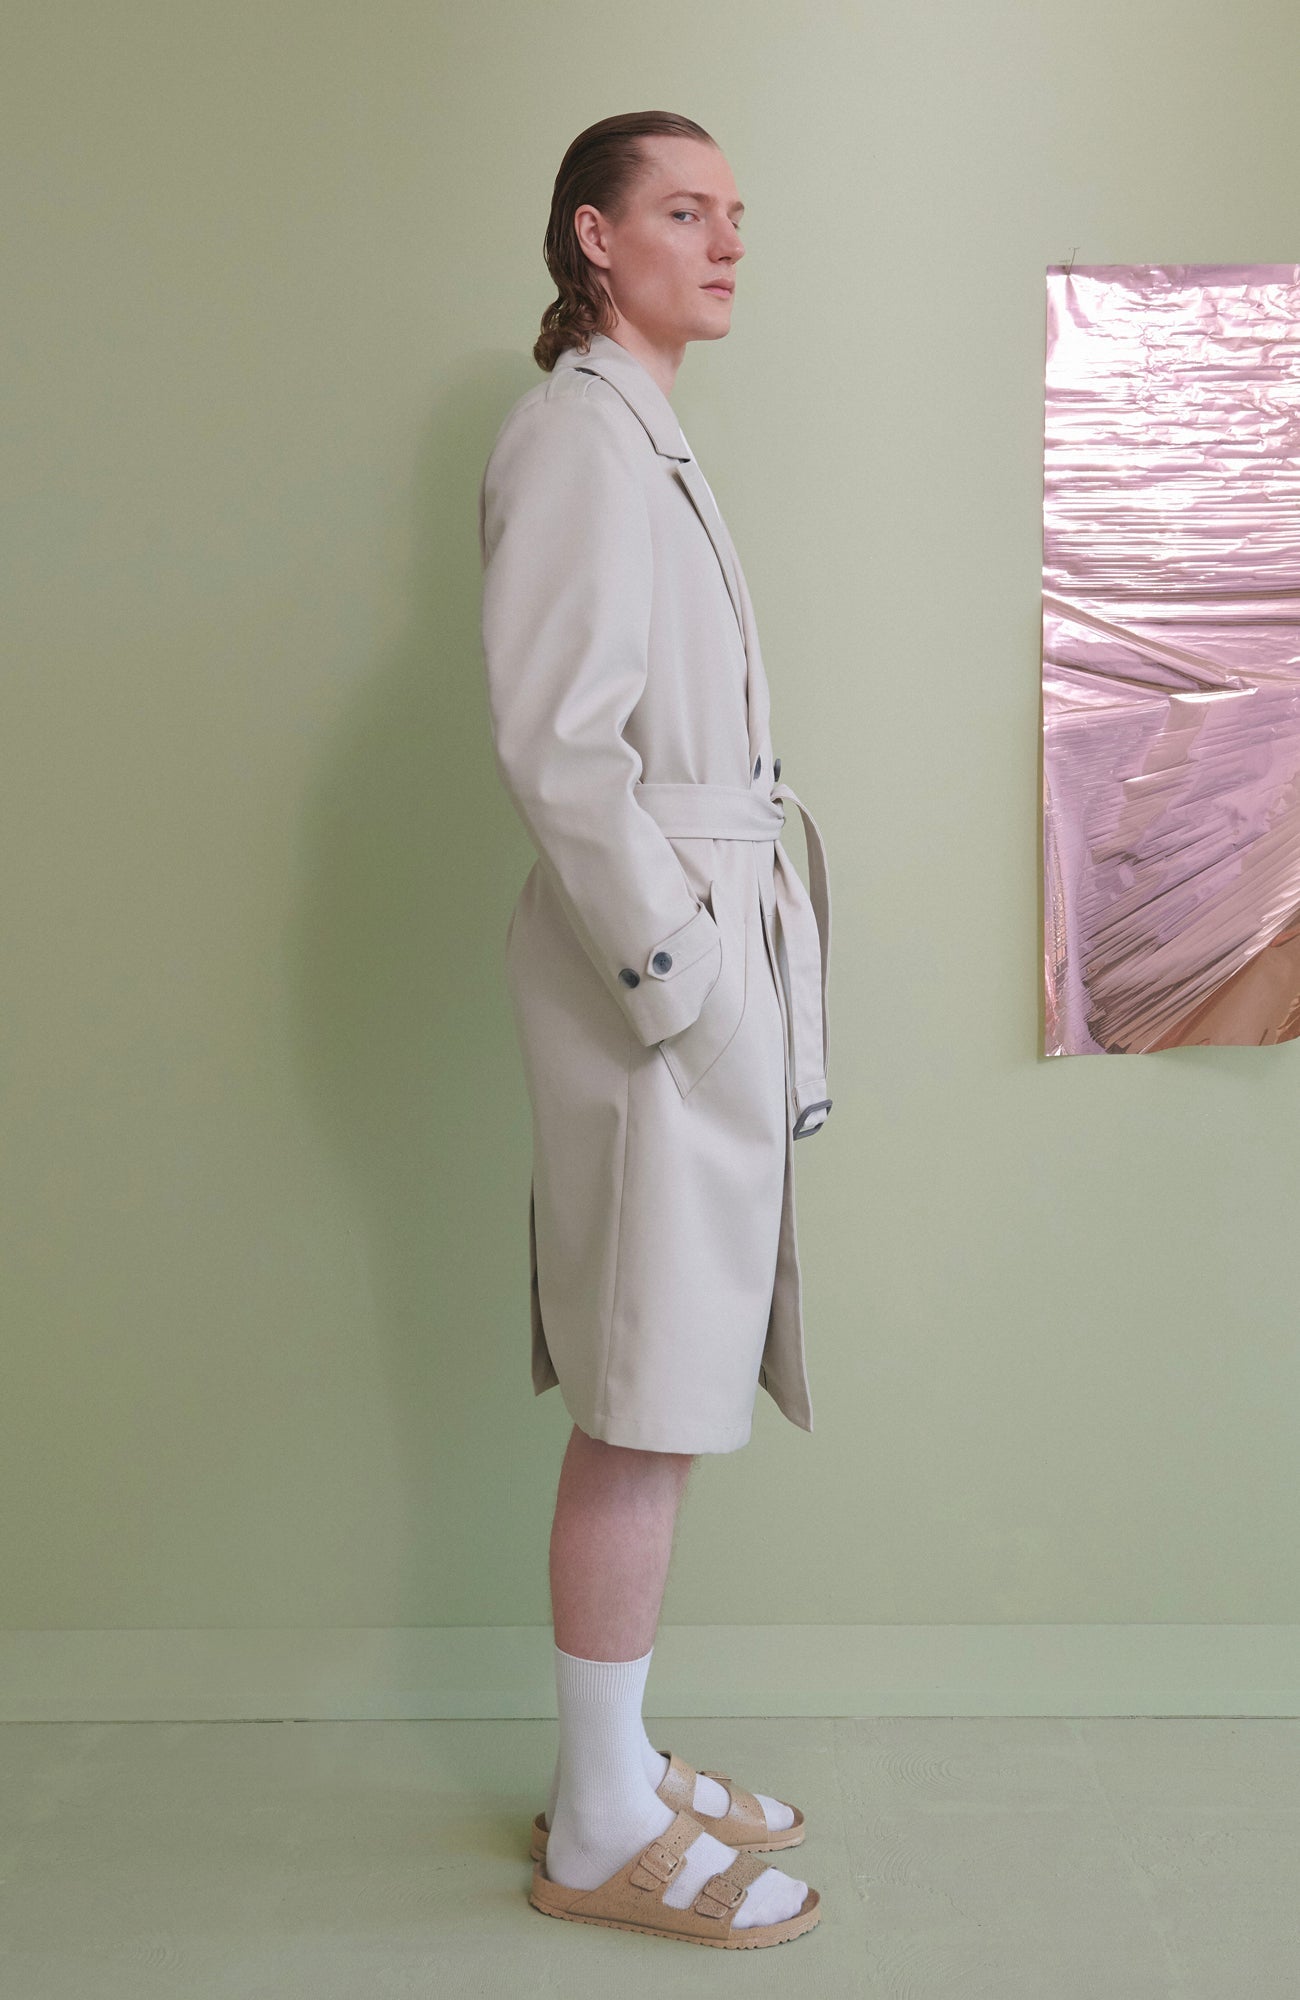 LIMITED EDITION: LUCAS LIGHT BEIGE TRENCH COAT - MENS - Cardinal of Canada-US-LIMITED EDITION: LUCAS LIGHT BEIGE DOUBLE BREAST TRENCH COAT 44.5 INCH LENGTH